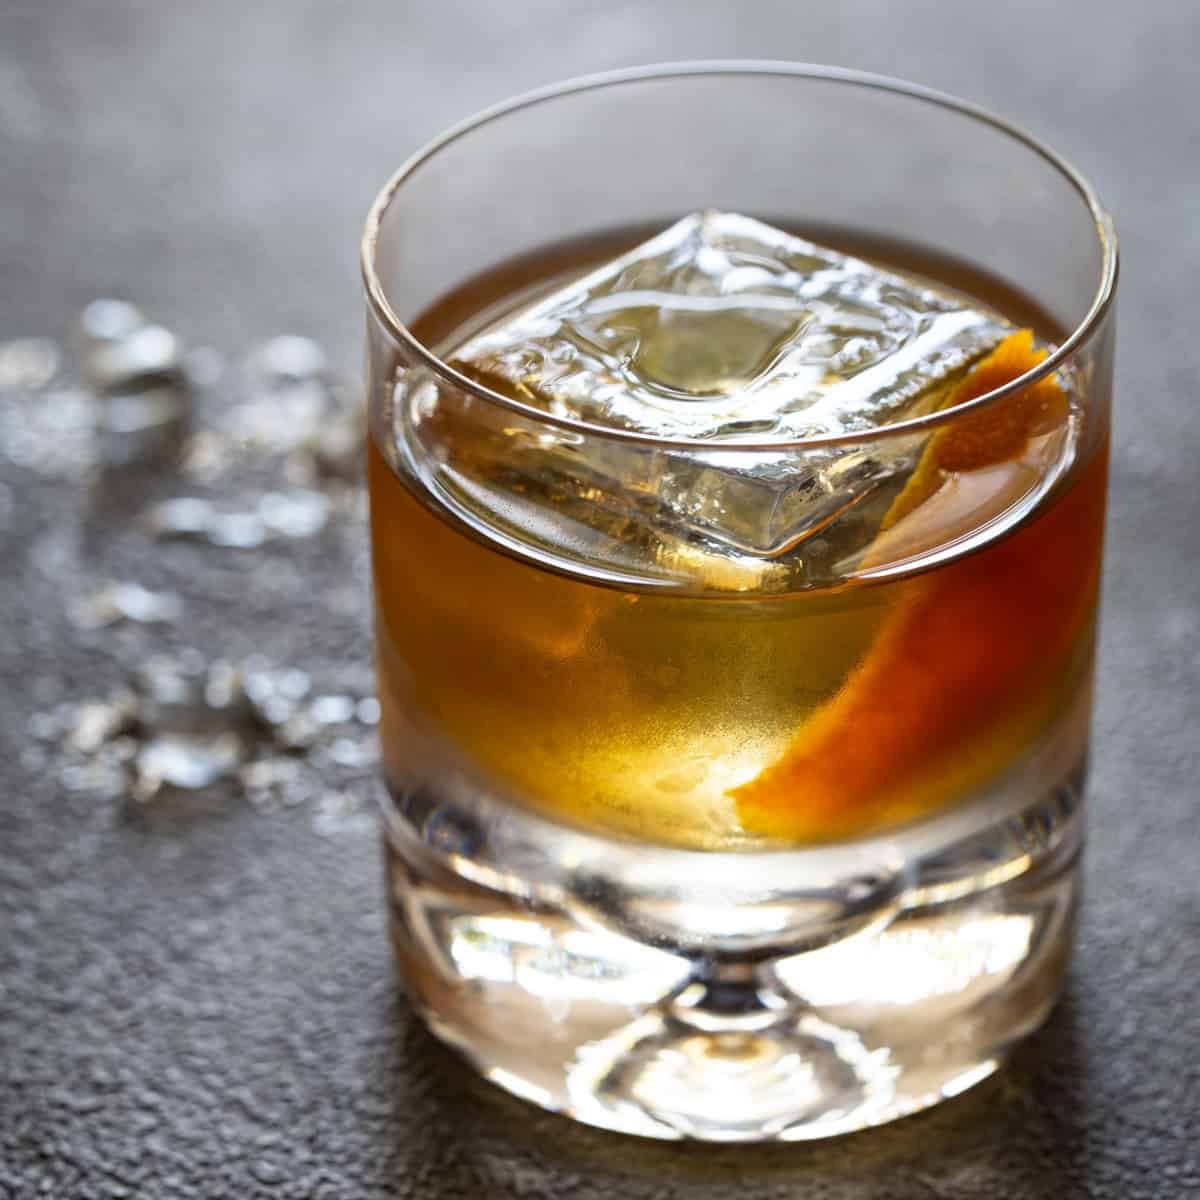 A glass of old fashioned drink.